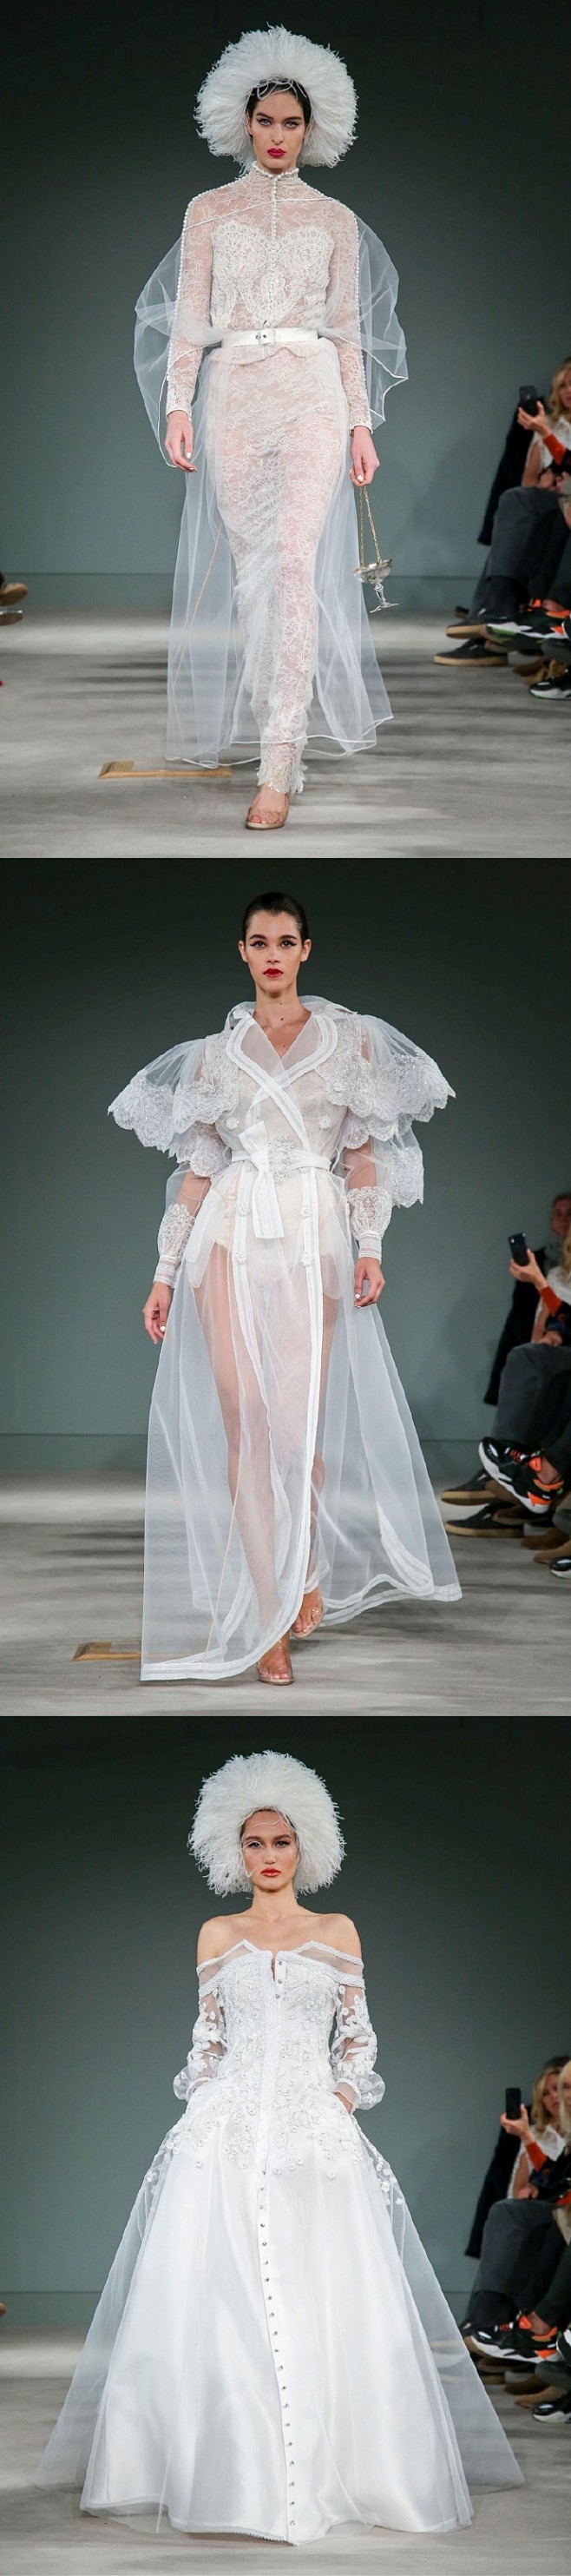 Alexis Mabille SS 20...